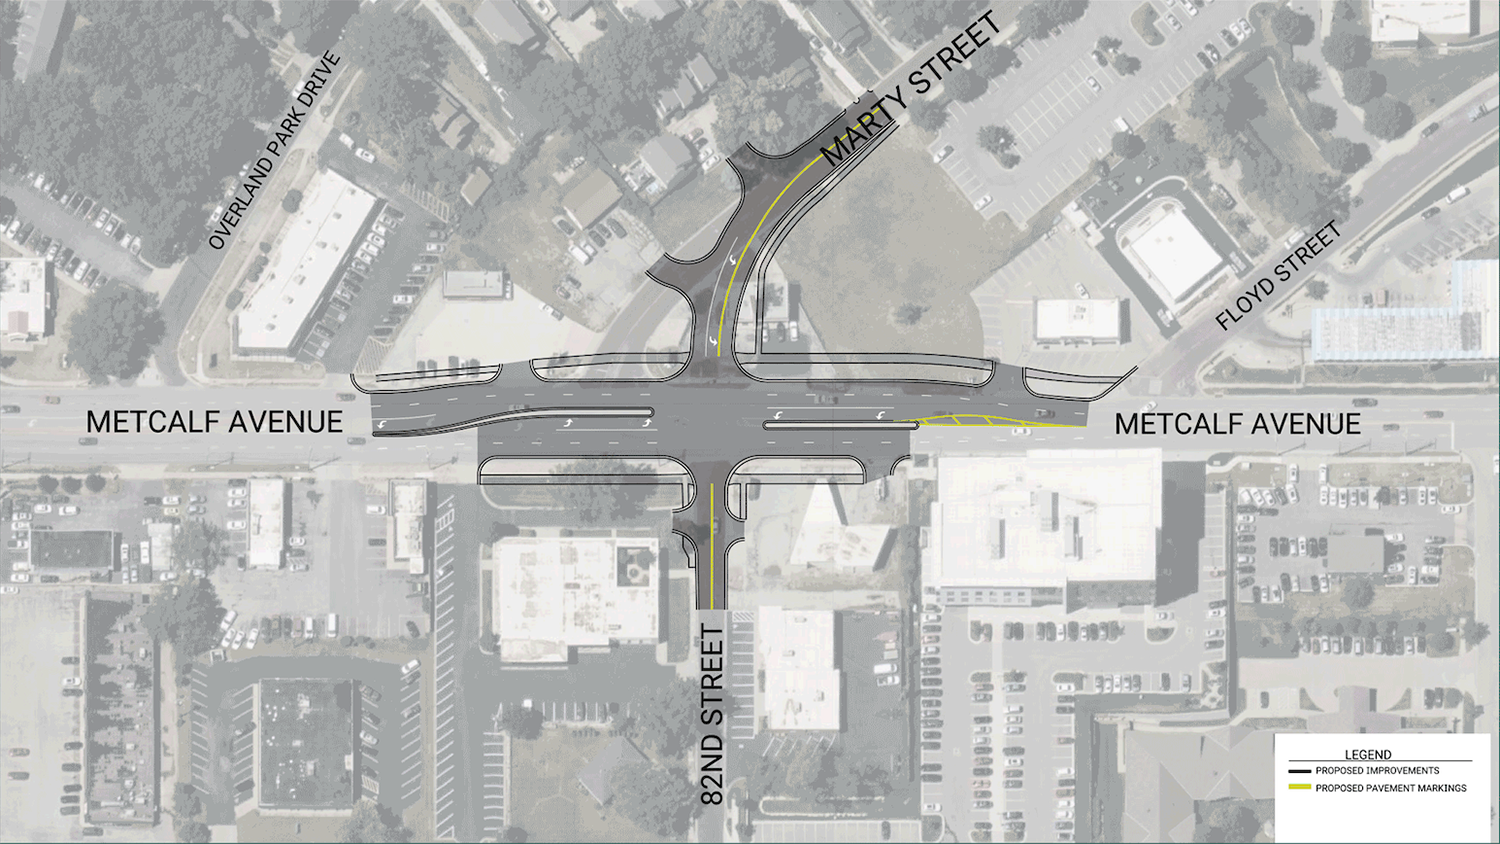 A map depiction of what the Metcalf Avenue and 82nd Street intersection will look like after the realignment project.